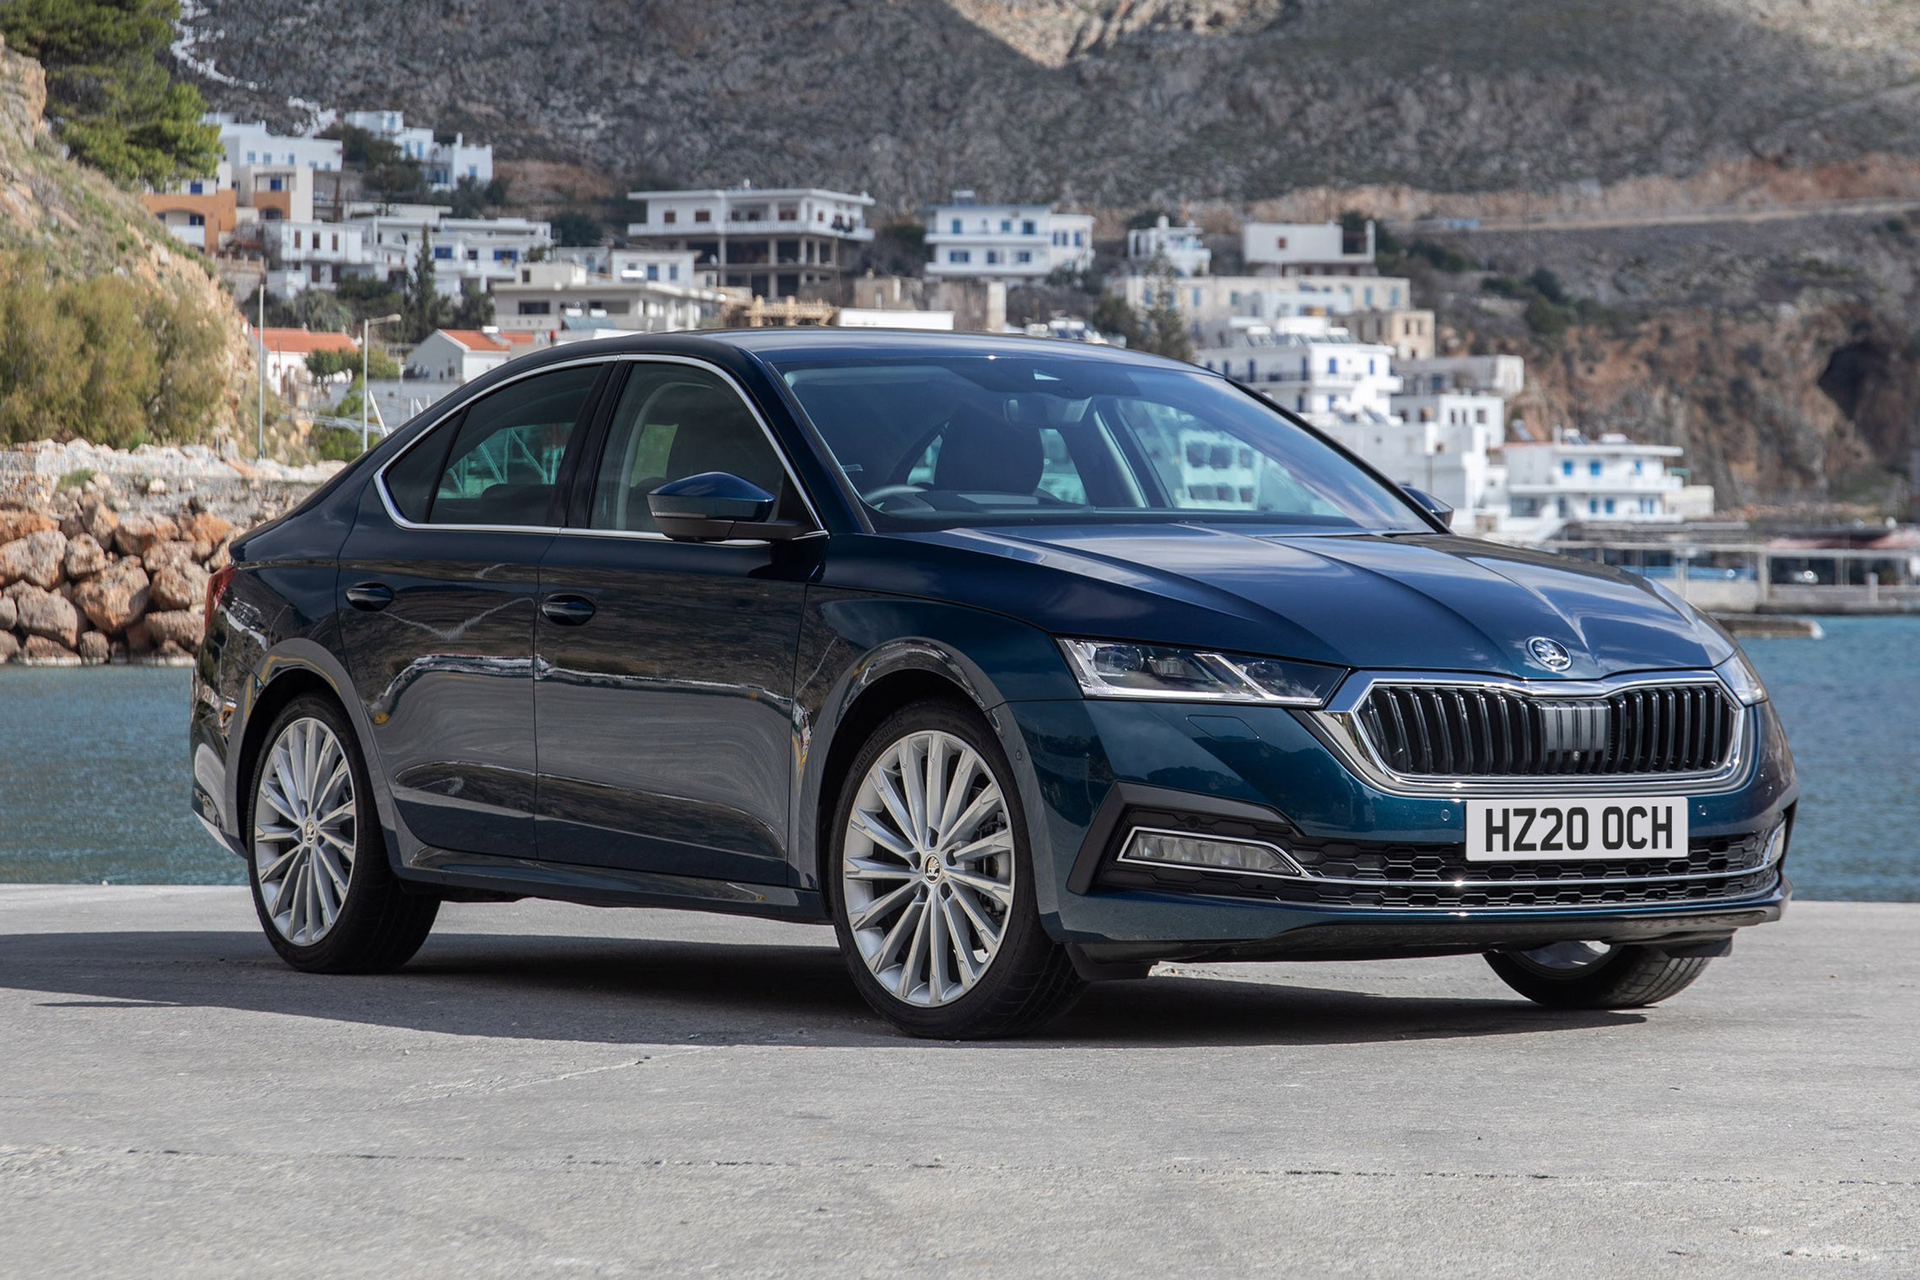 Octavia 2021: Skoda's premium but pricey sedan comes packed with features